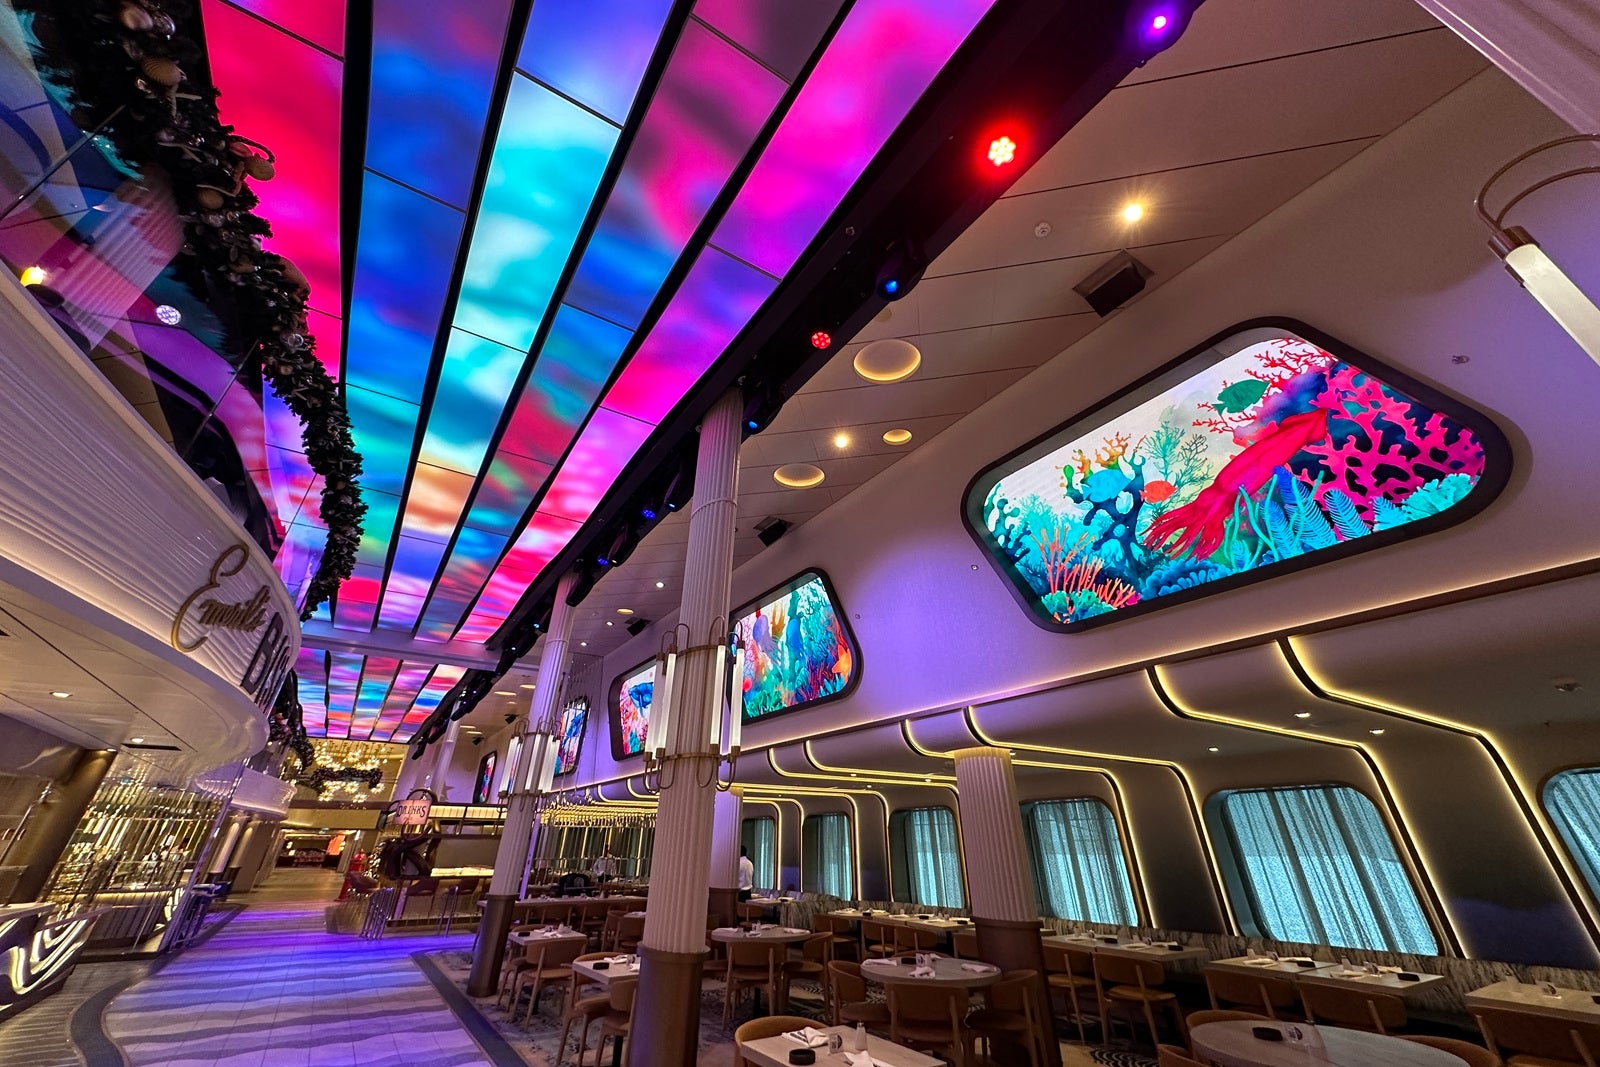 A cruise-ship indoor promenade with colorful LED screens and seating